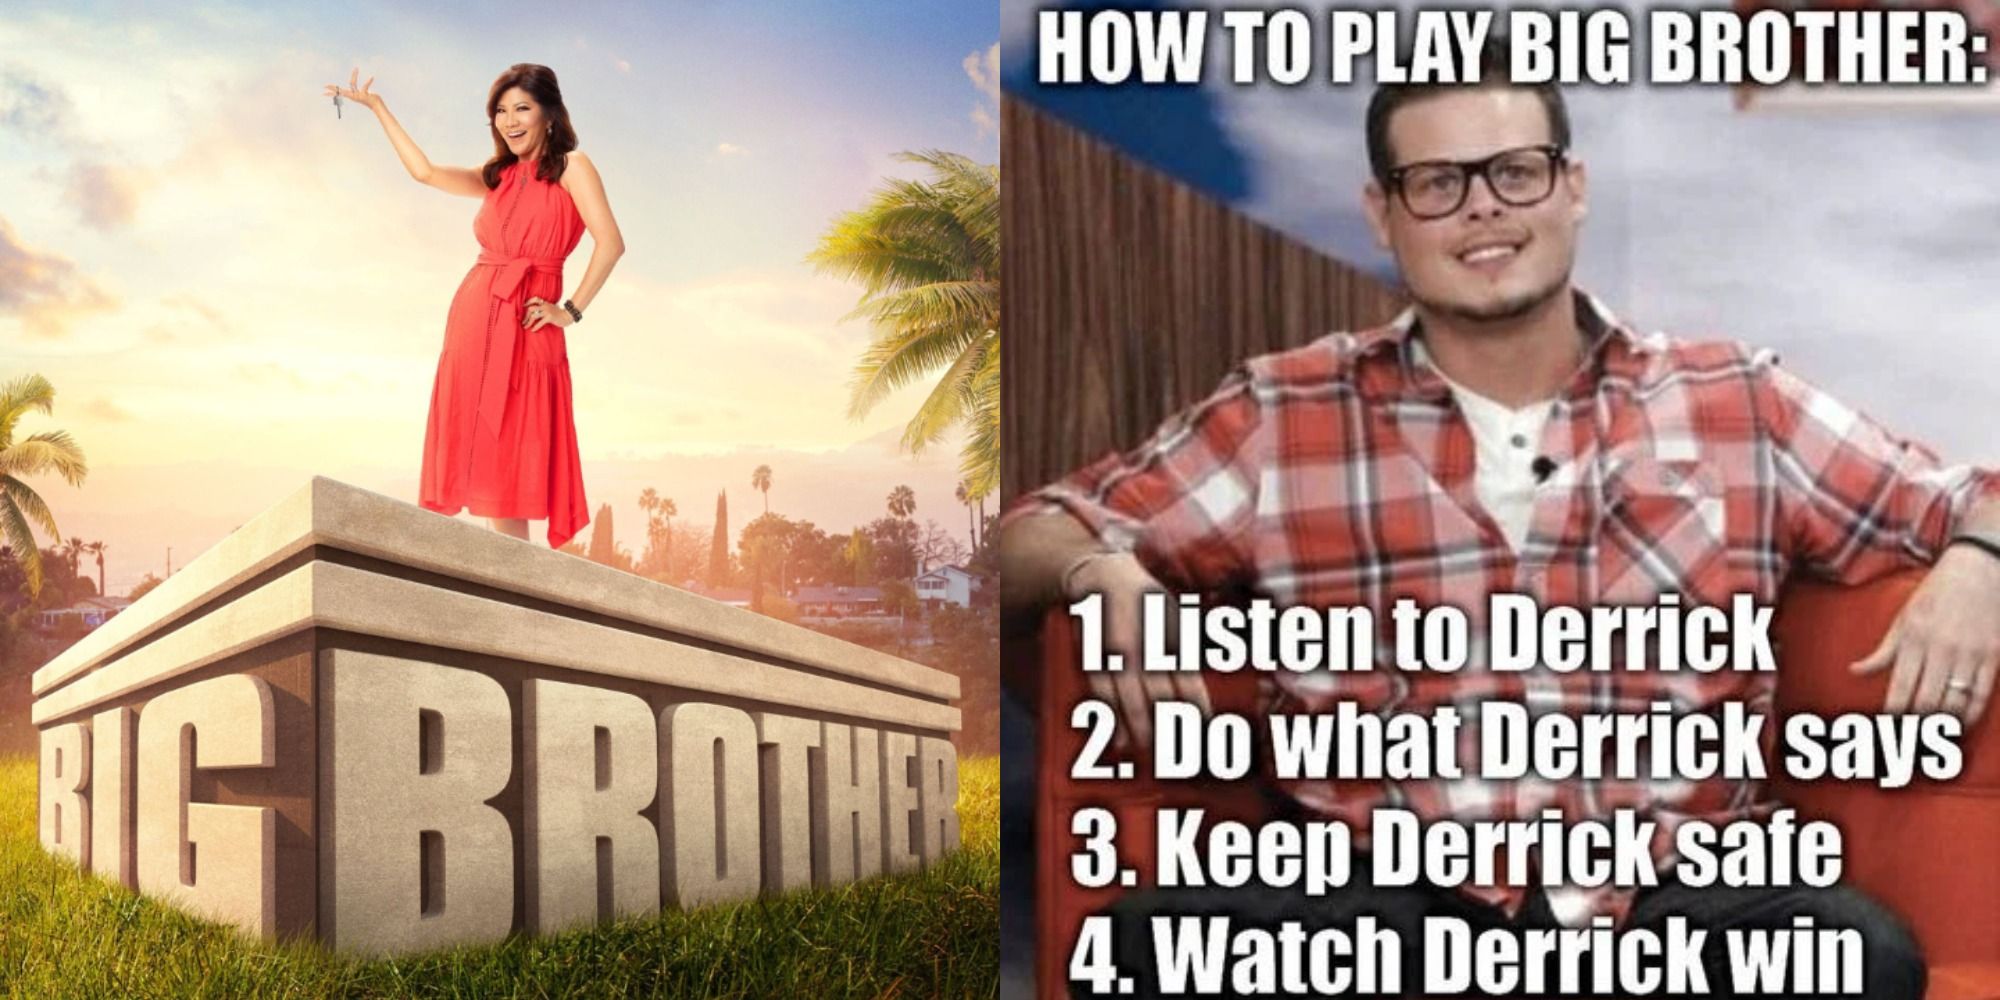 Split image of the Big Brother logo and a meme